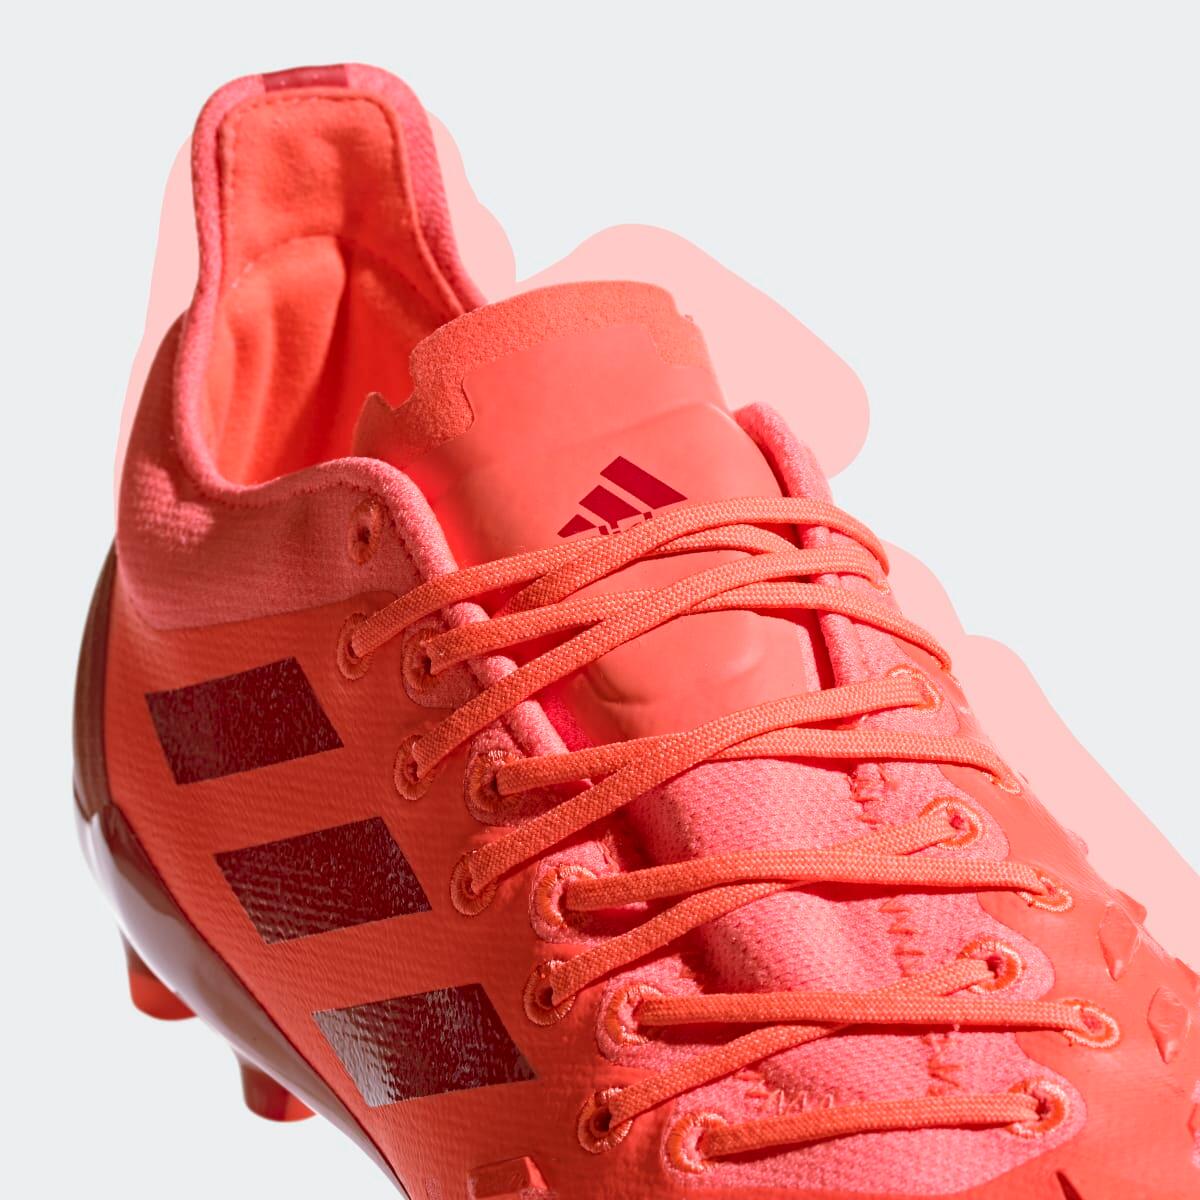 Adidas Predator XP Firm Ground Rugby Boots 5/7